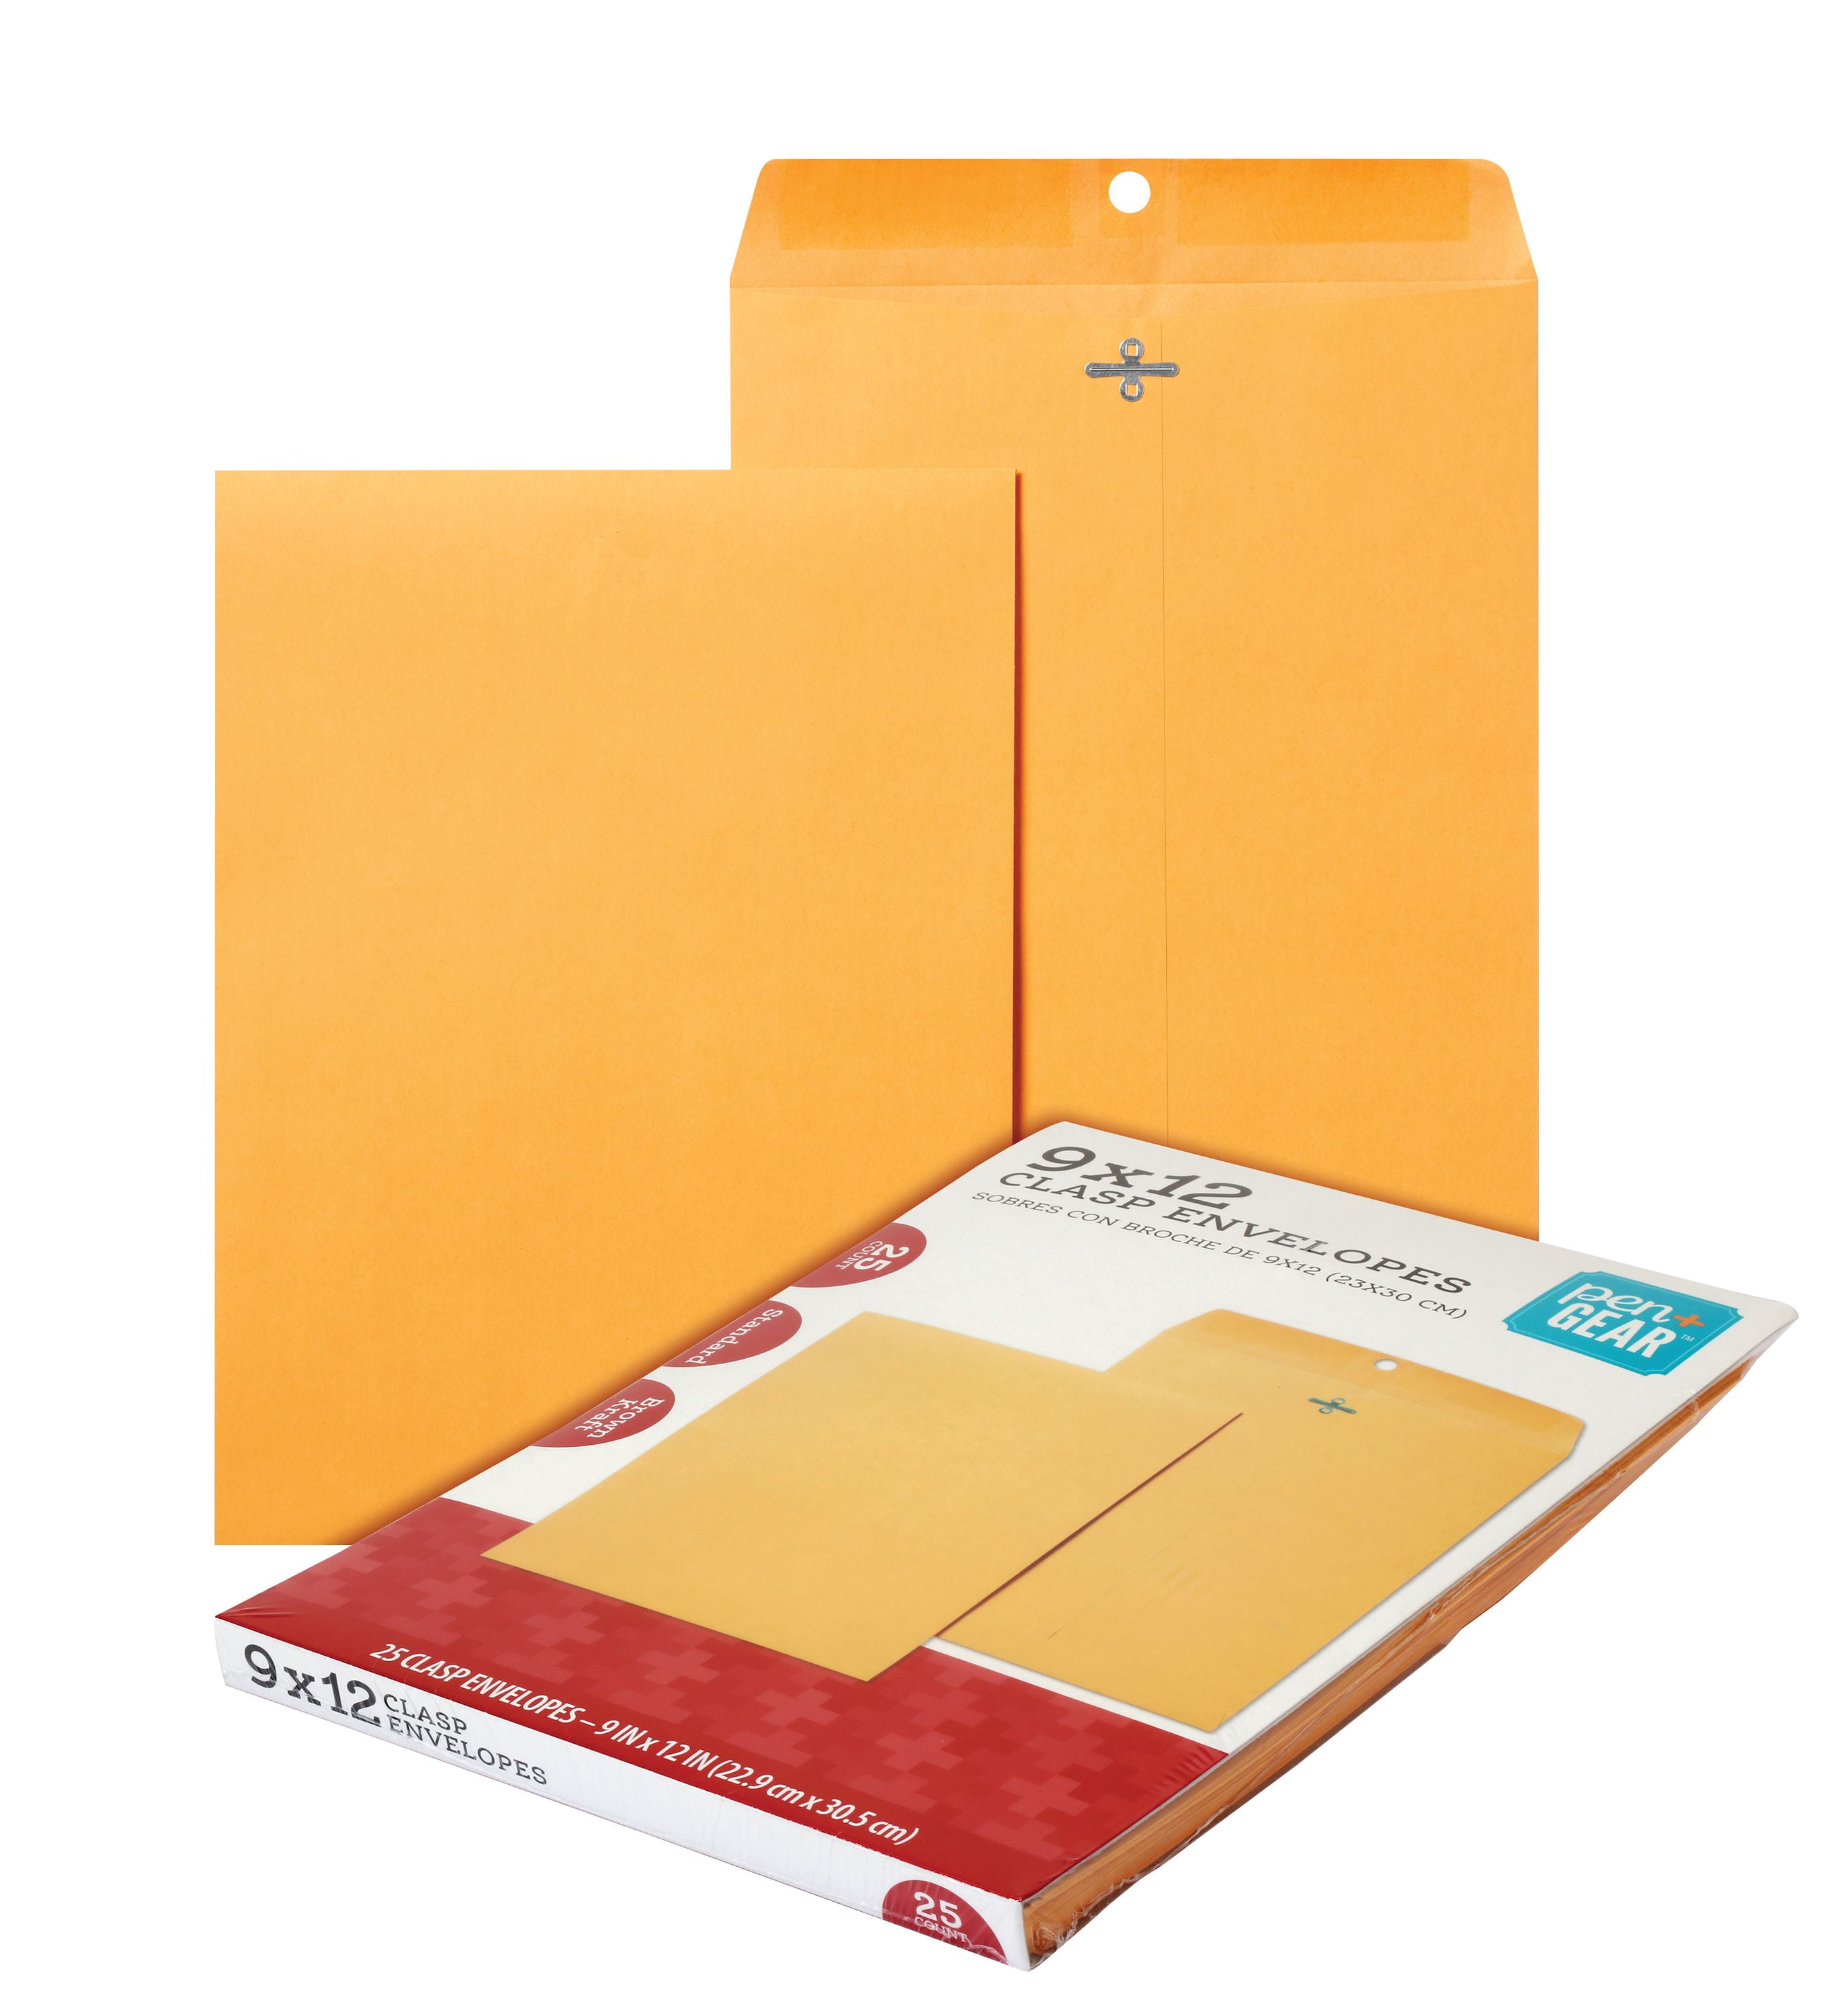 9x12 Clasp Envelopes Brown Kraft Catalog Envelopes with Clasp Closure & Gummed Seal 28lb Heavyweight Paper Envelopes for Home 100 Box 9 x 12 Office Business Legal or School 